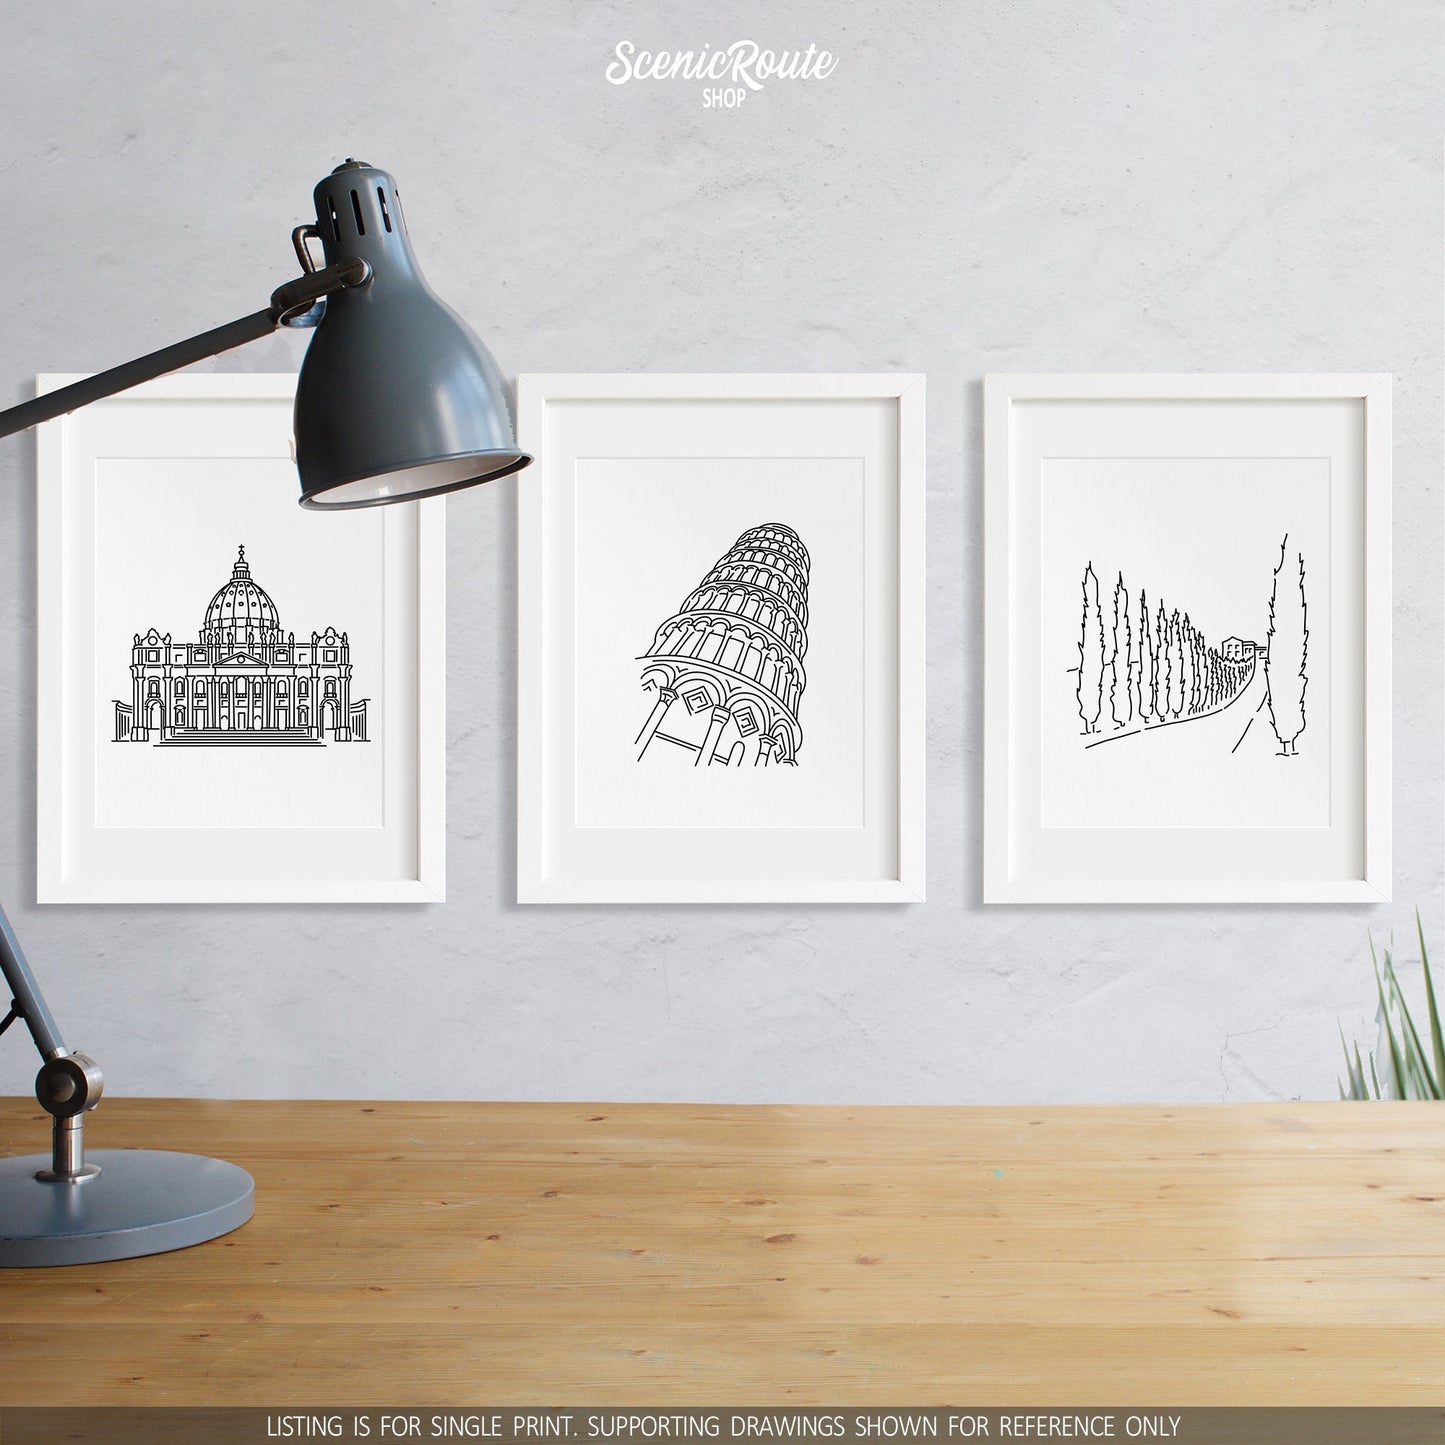 A group of three framed drawings on a wall above a desk with a lamp. The line art drawings include Saint Peters Basilica, the Leaning Tower of Pisa, and a Tuscany Drive